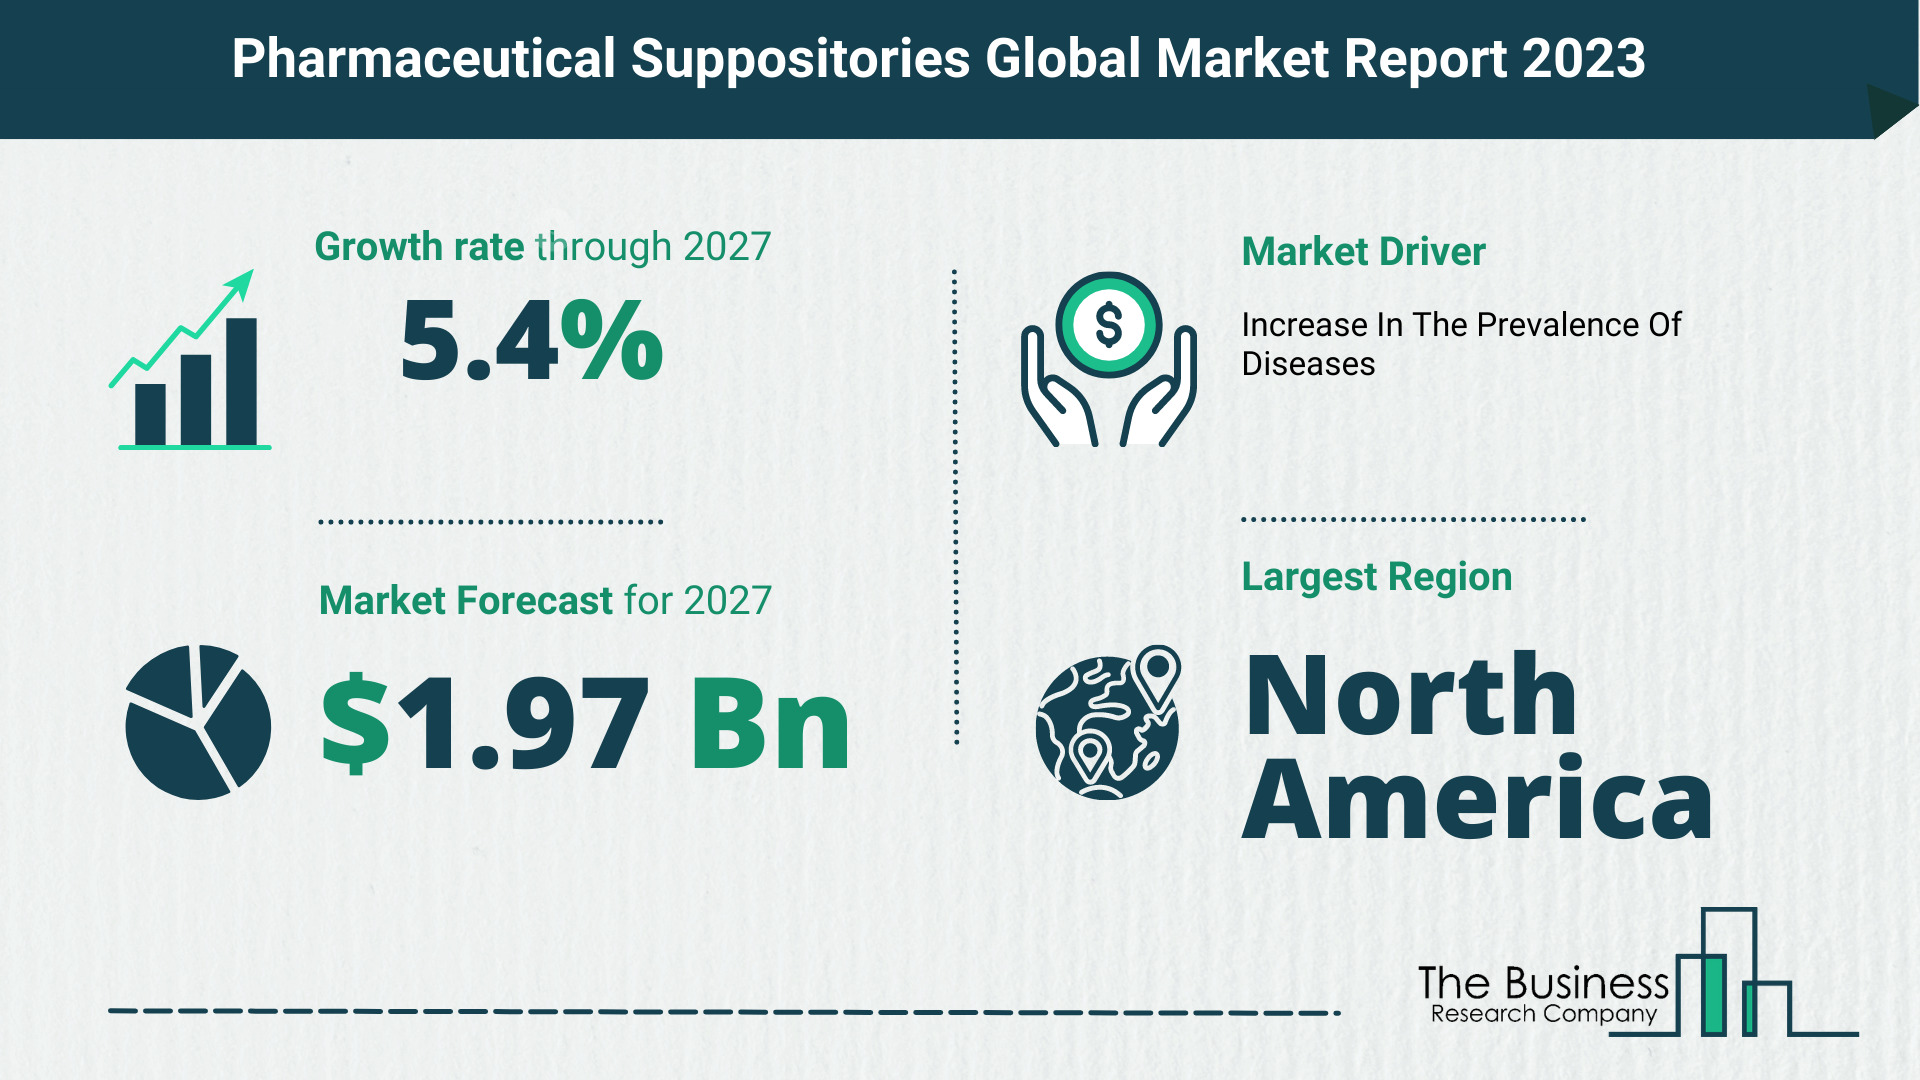 pharmaceutical suppositories market size, pharmaceutical suppositories market research, pharmaceutical suppositories market forecast, pharmaceutical suppositories market outlook, pharmaceutical suppositories market overview, pharmaceutical suppositories market, pharmaceutical suppositories market trends, pharmaceutical suppositories market growth, pharmaceutical suppositories market analysis, pharmaceutical suppositories market share, pharmaceutical suppositories market report, pharmaceutical suppositories market segments